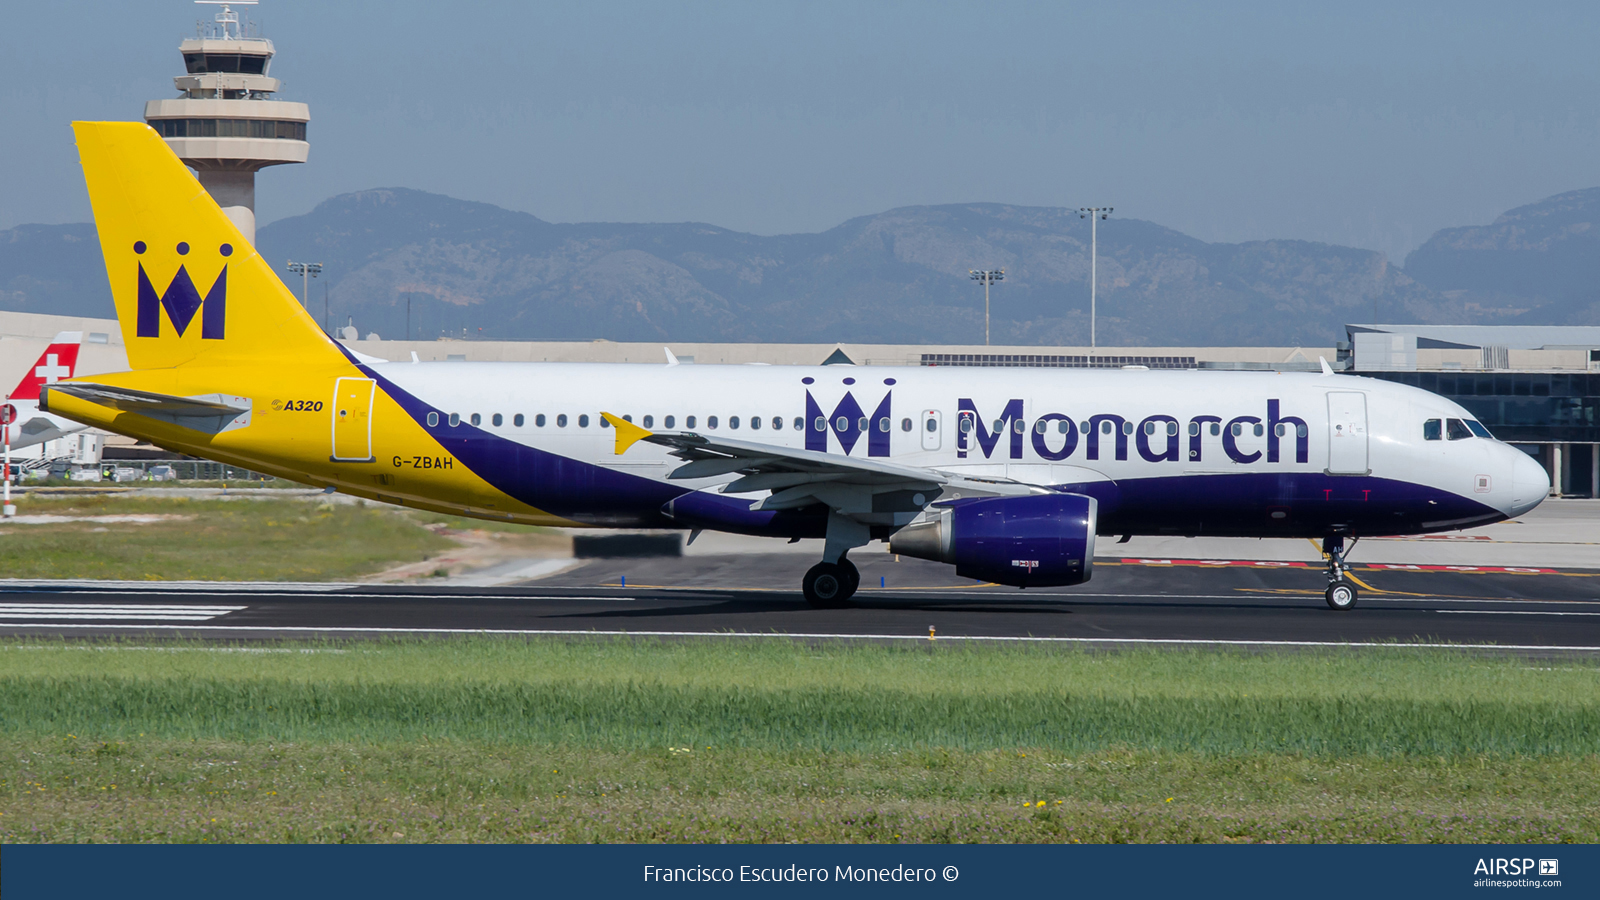 Monarch Airlines  Airbus A320  G-ZBAH